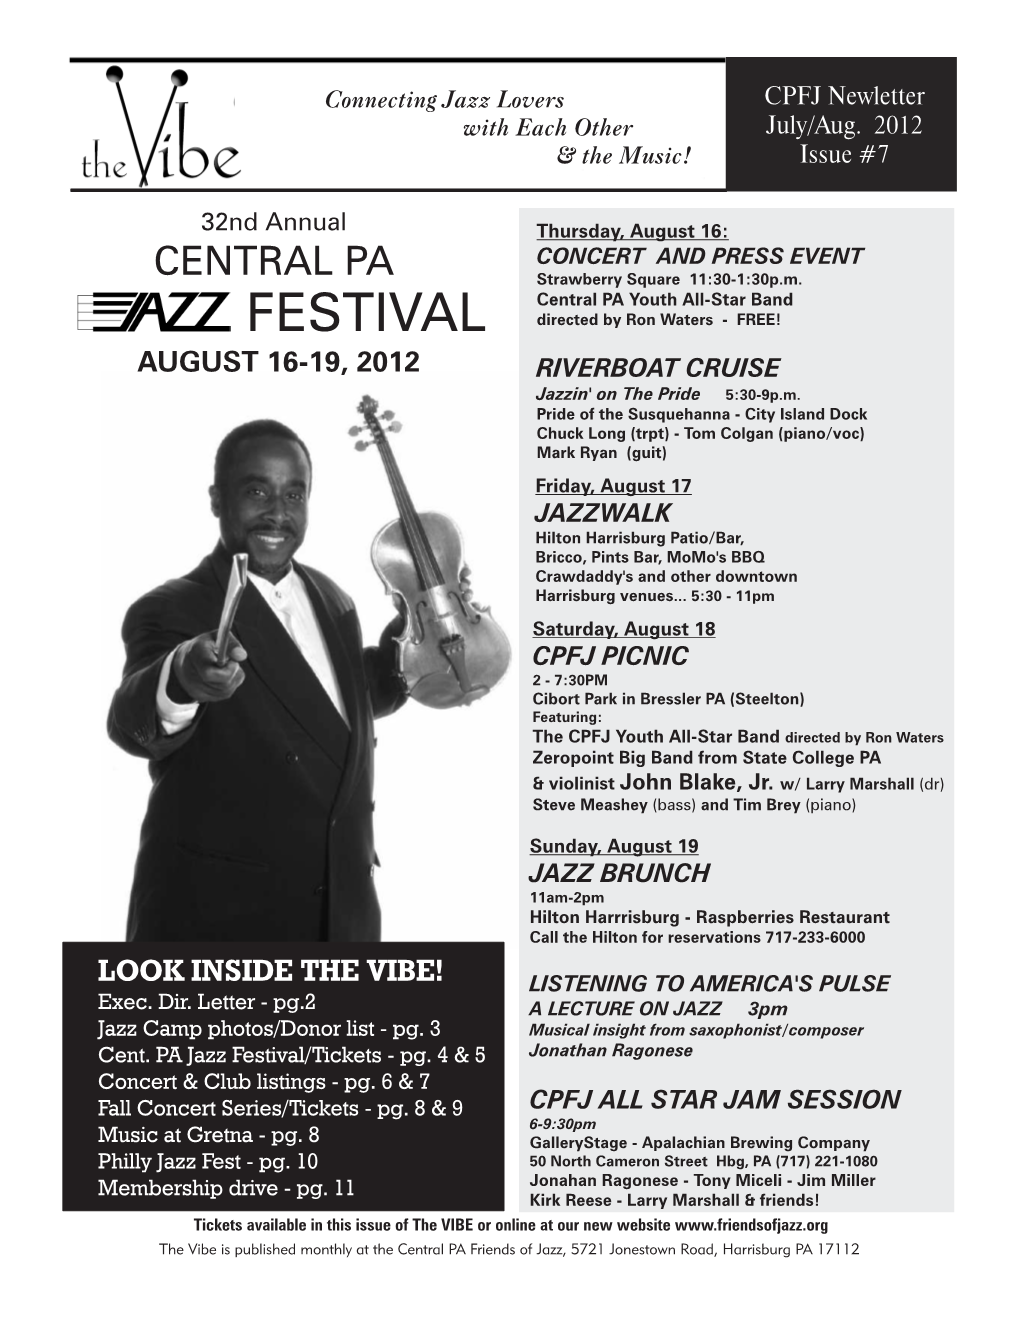 Central PA Jazz Festival Is Coming, August�16-19! It Will Include (Treasurer�-�Finance) Our Annual Picnic, River Boat Cruise, Jazzwalk and Other Notable Events